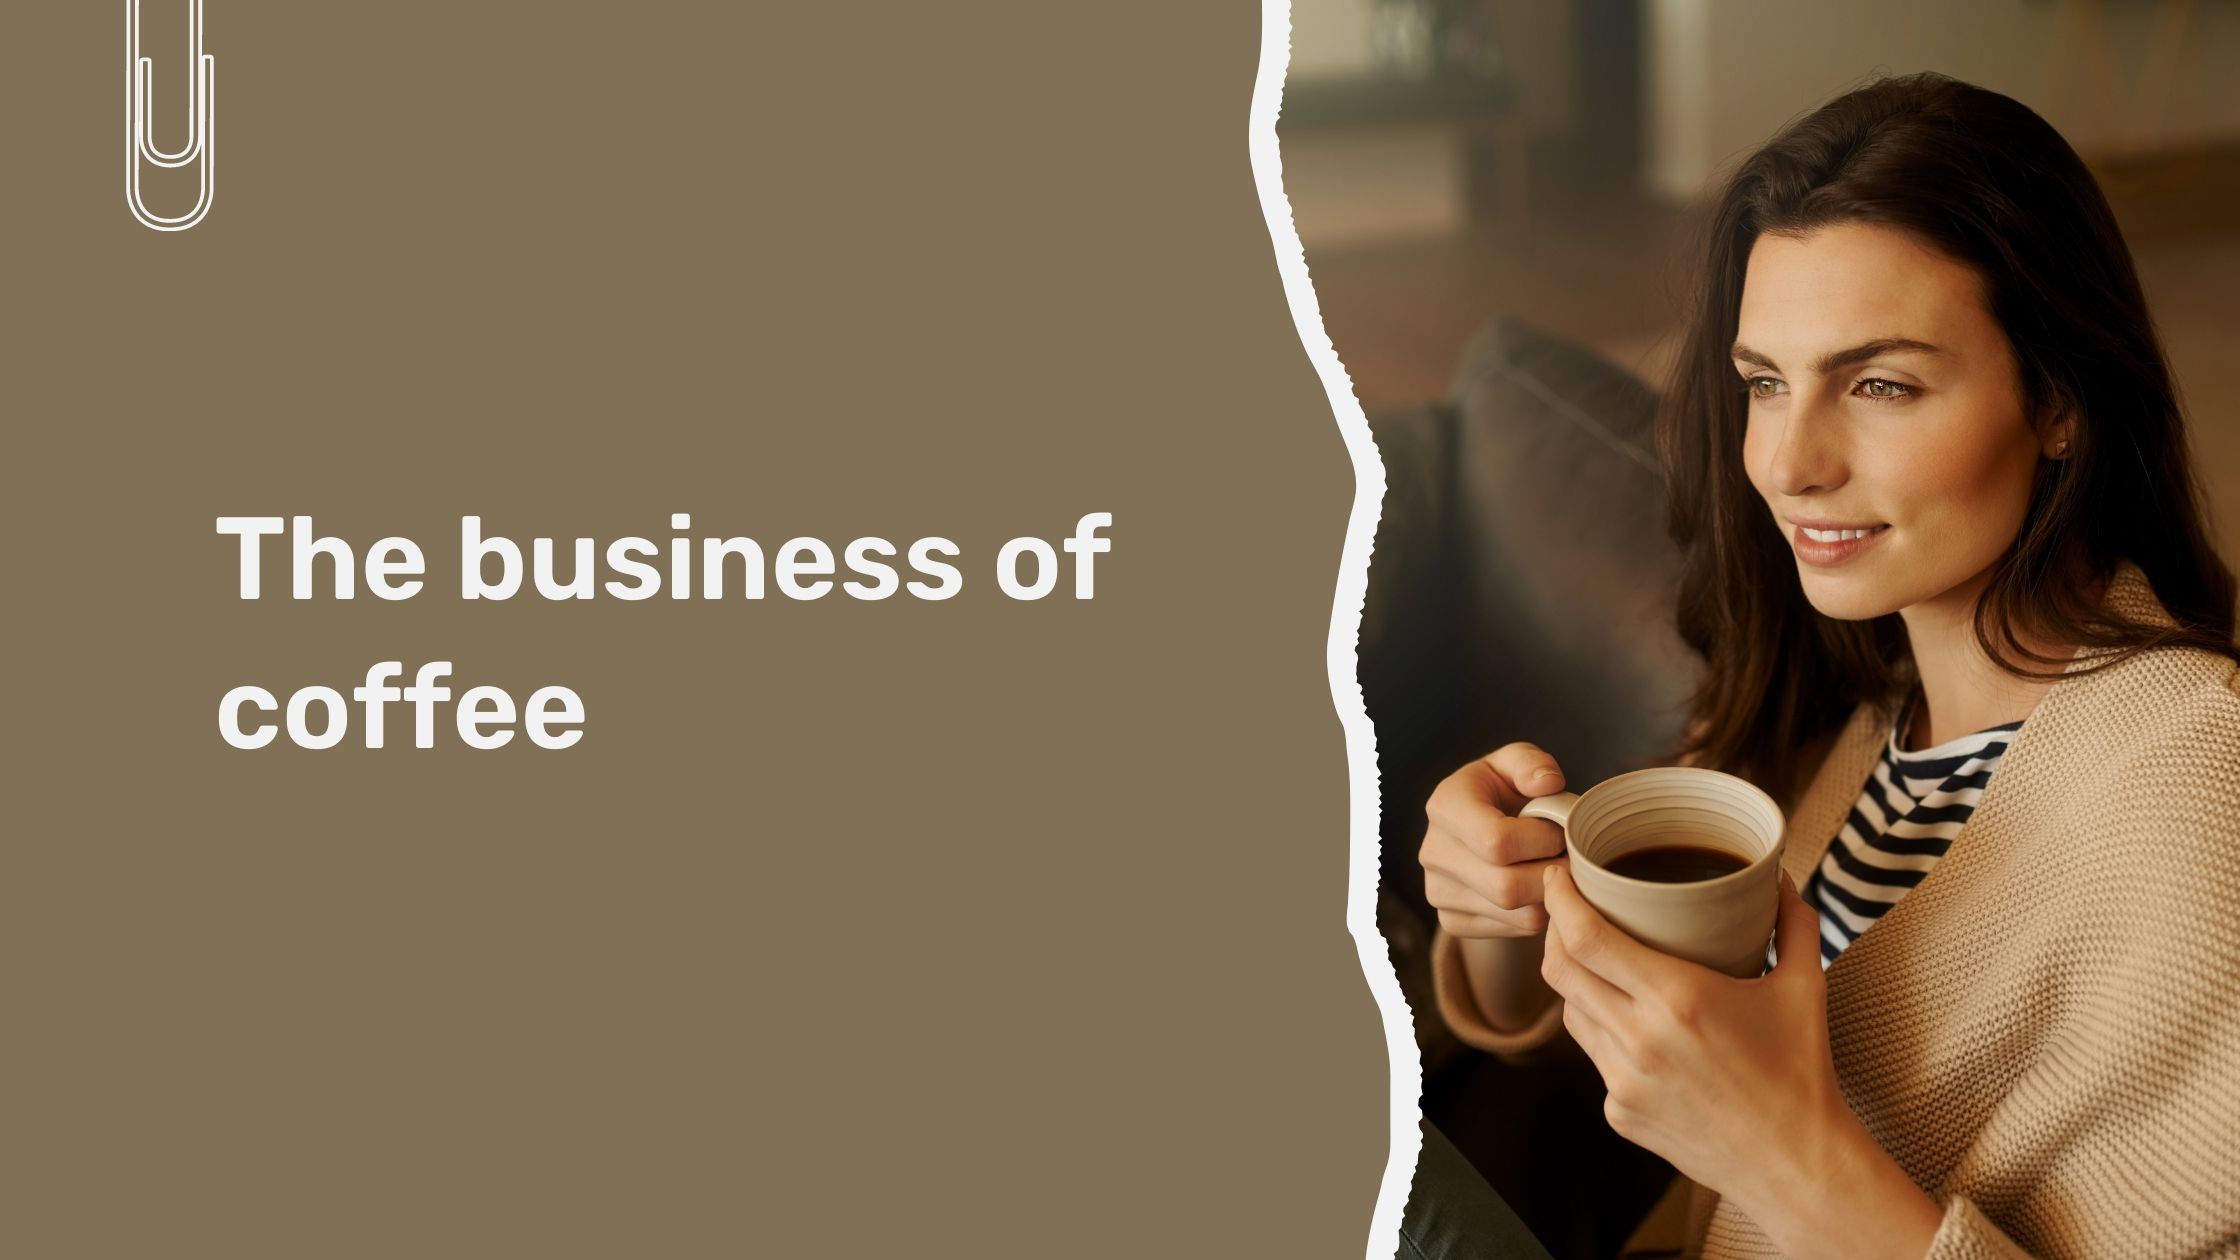 The business of coffee